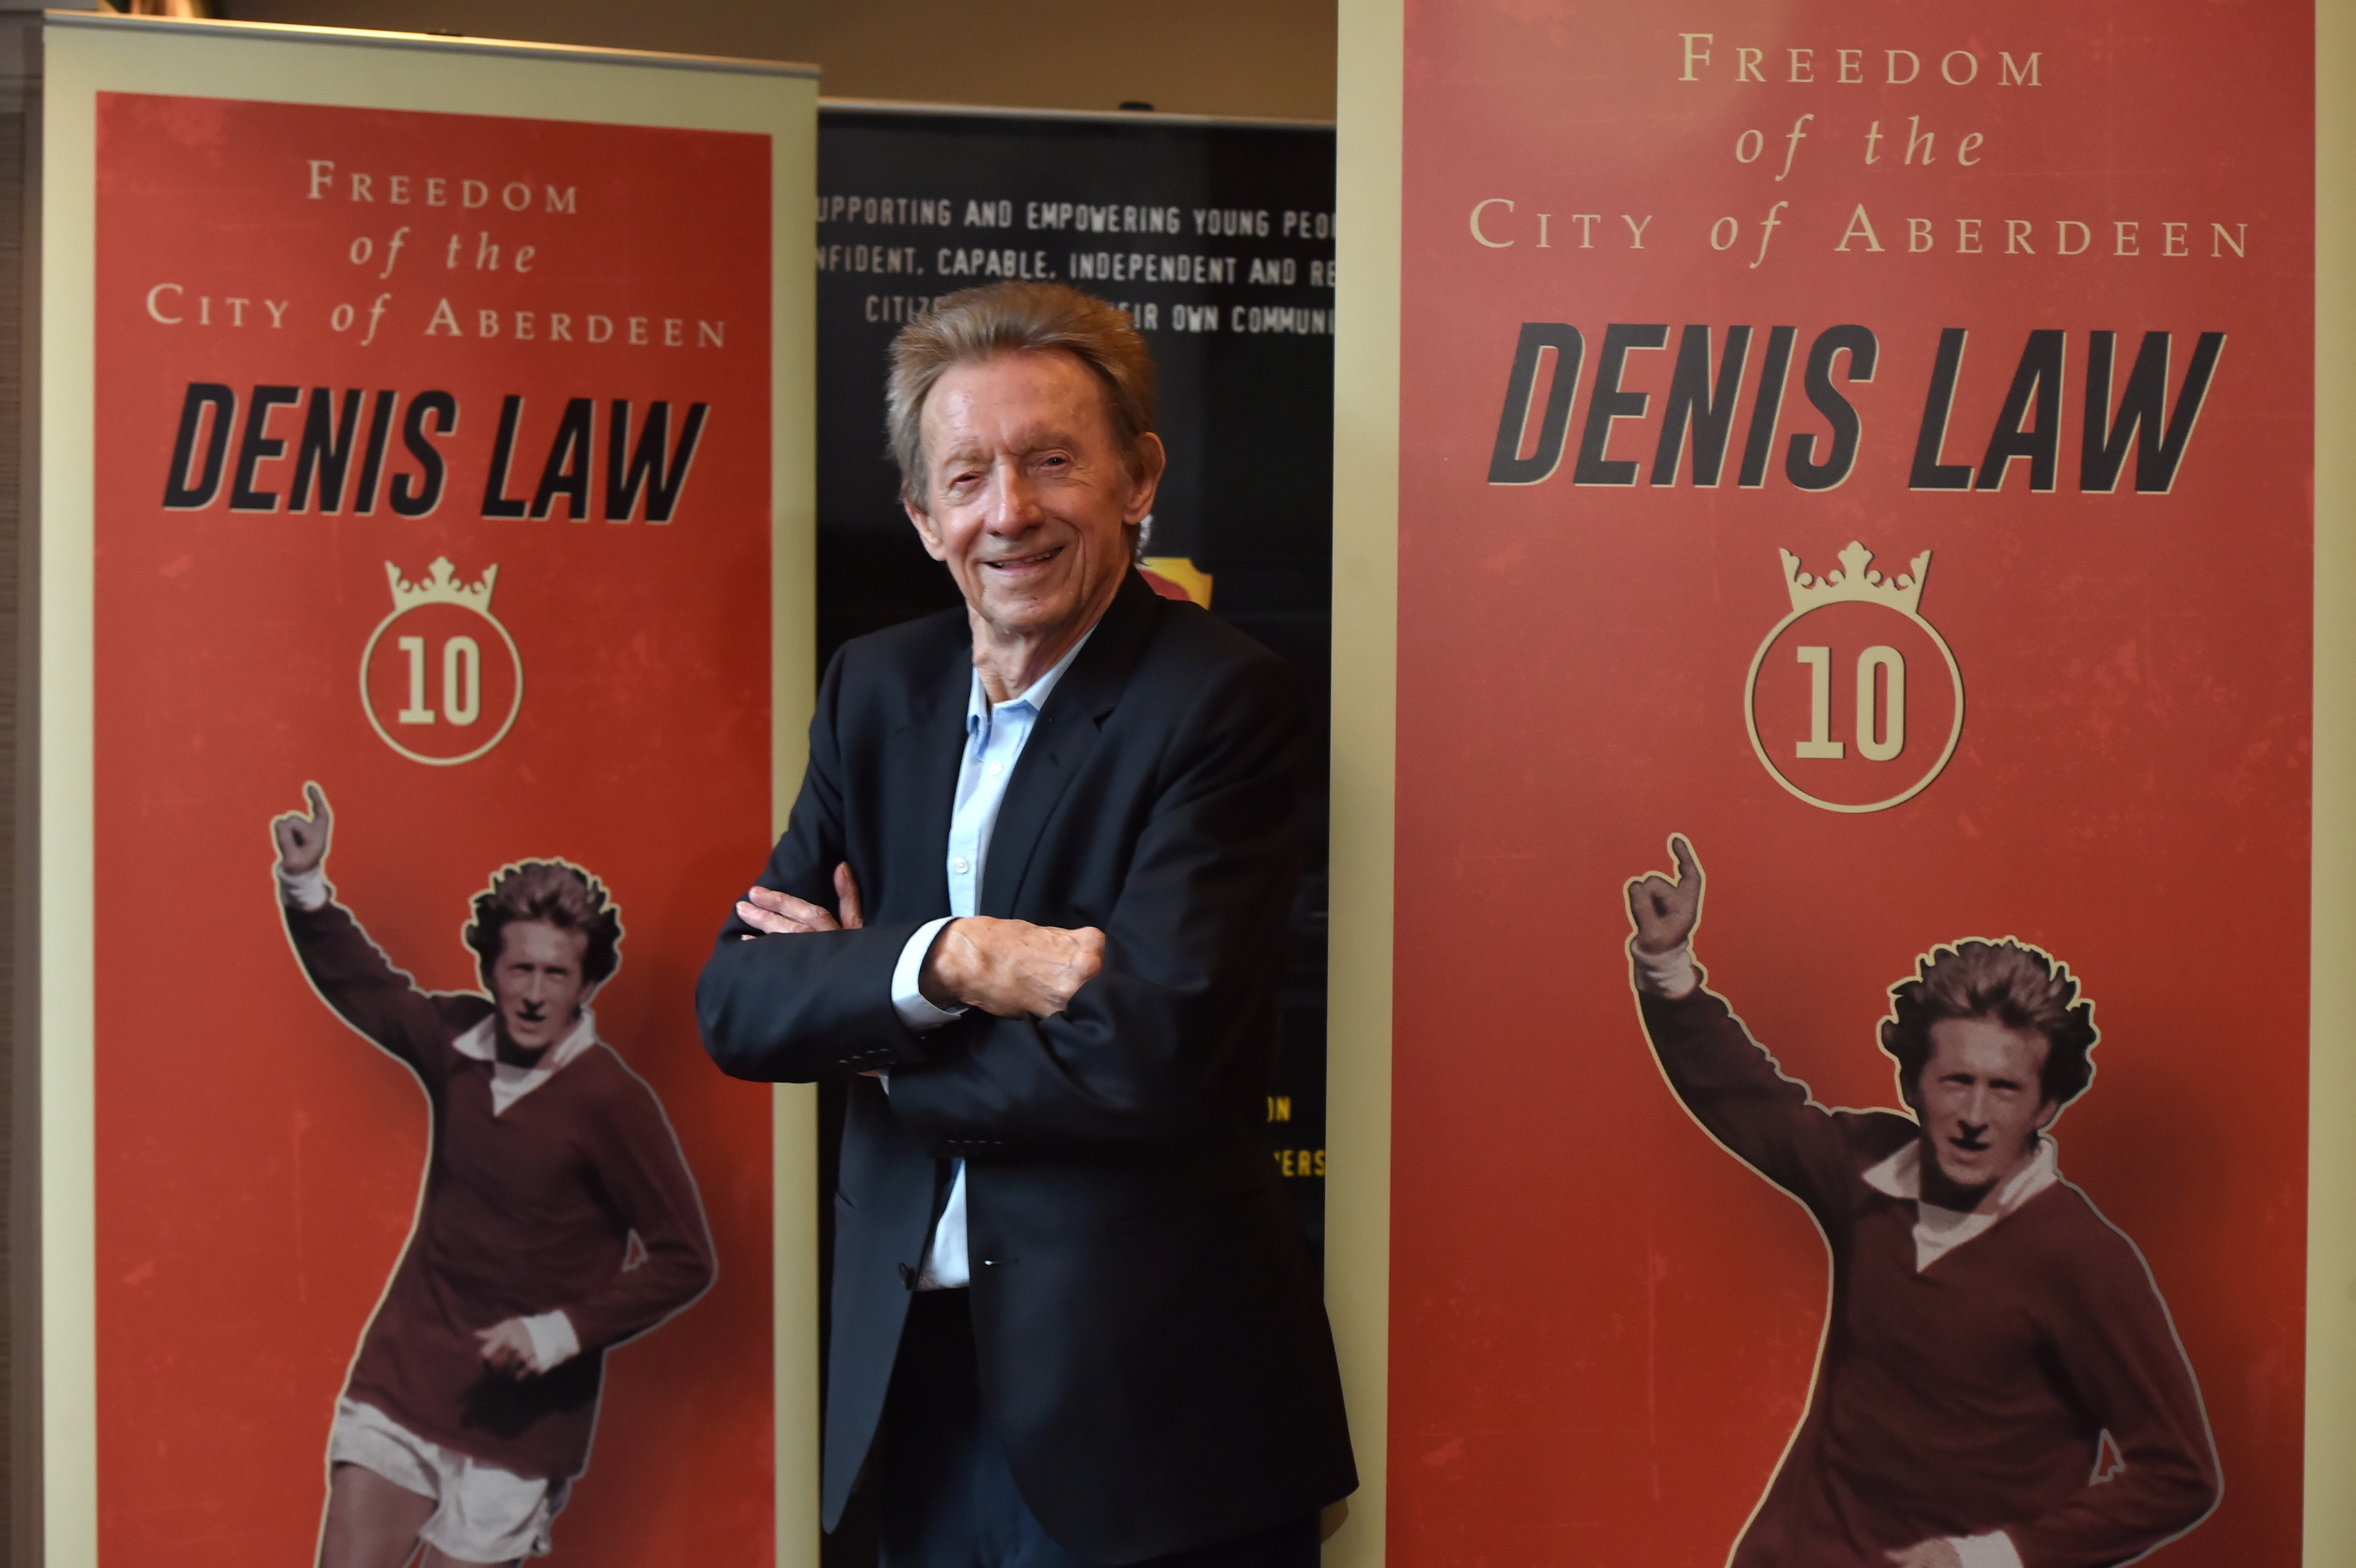 Denis Law.

Picture and video by Denis Law